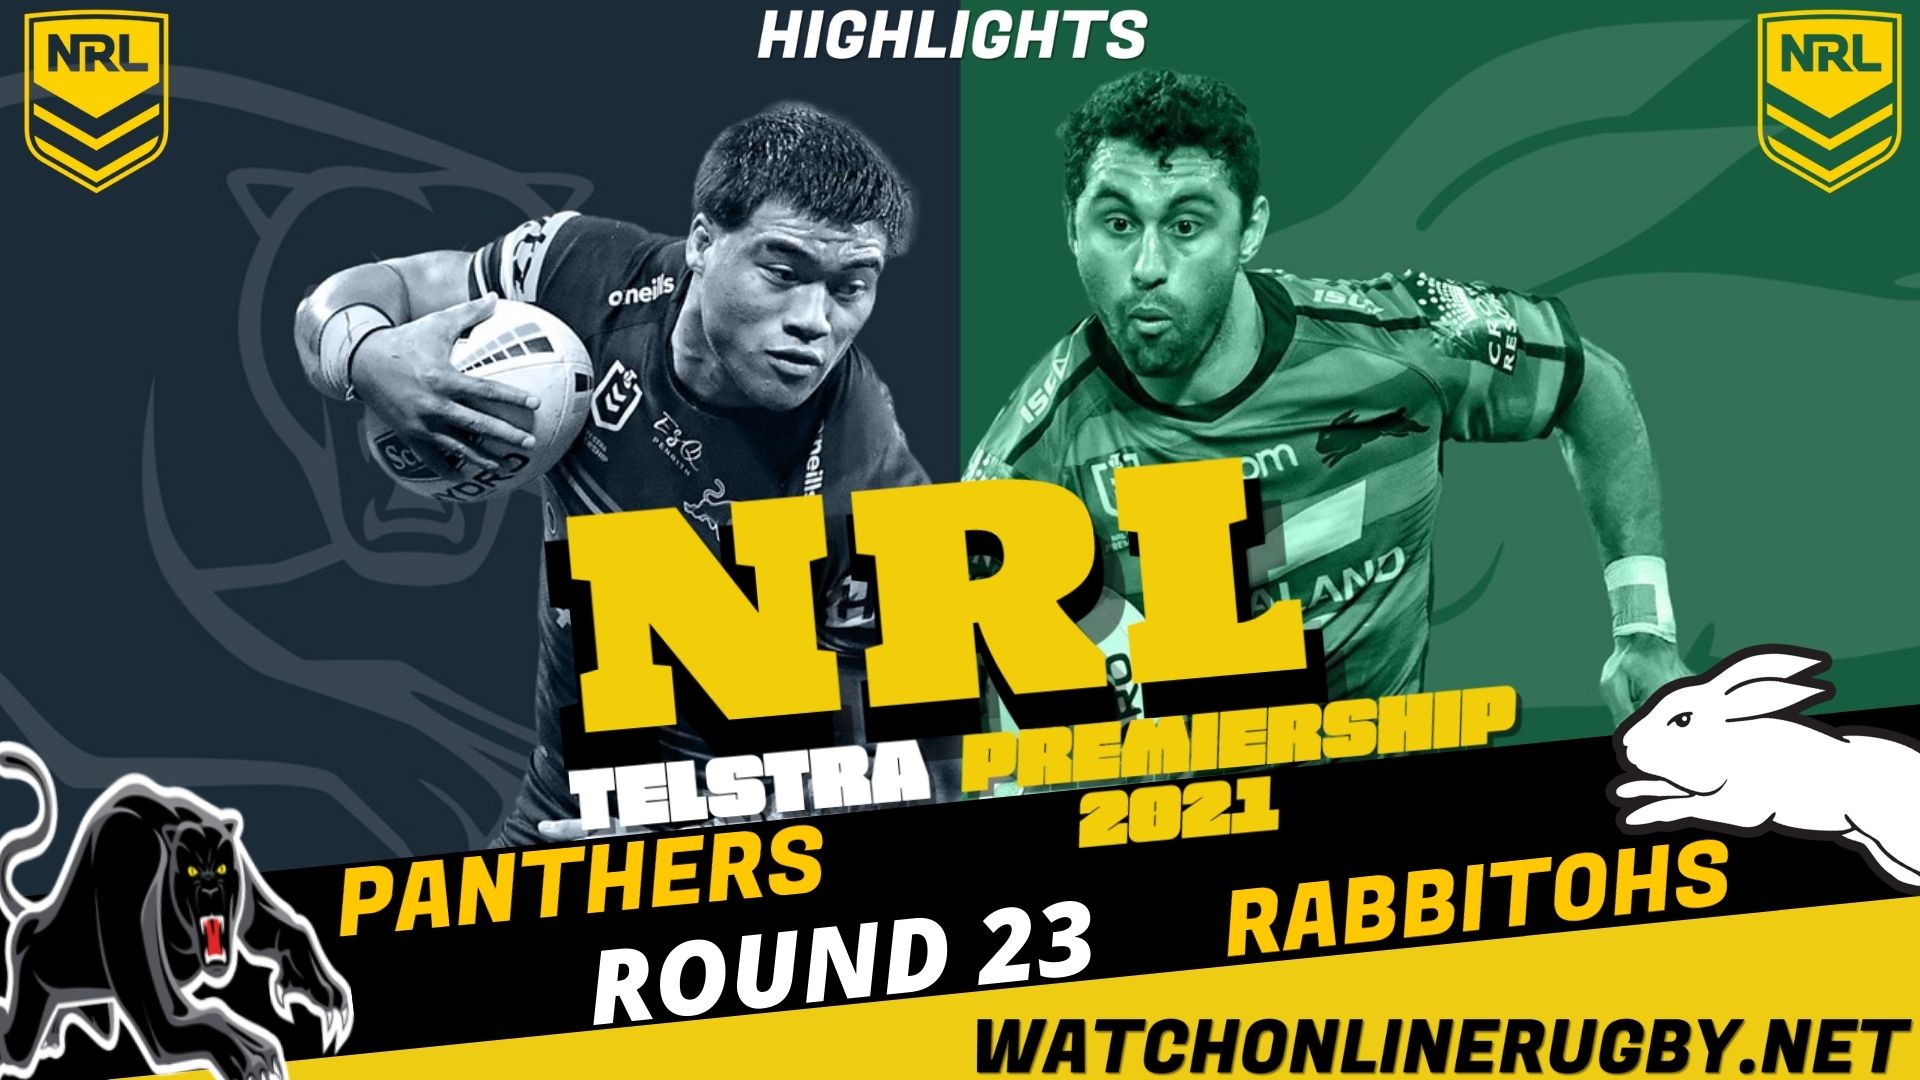 Panthers Vs Rabbitohs Highlights 2021 RD 23 NRL Rugby